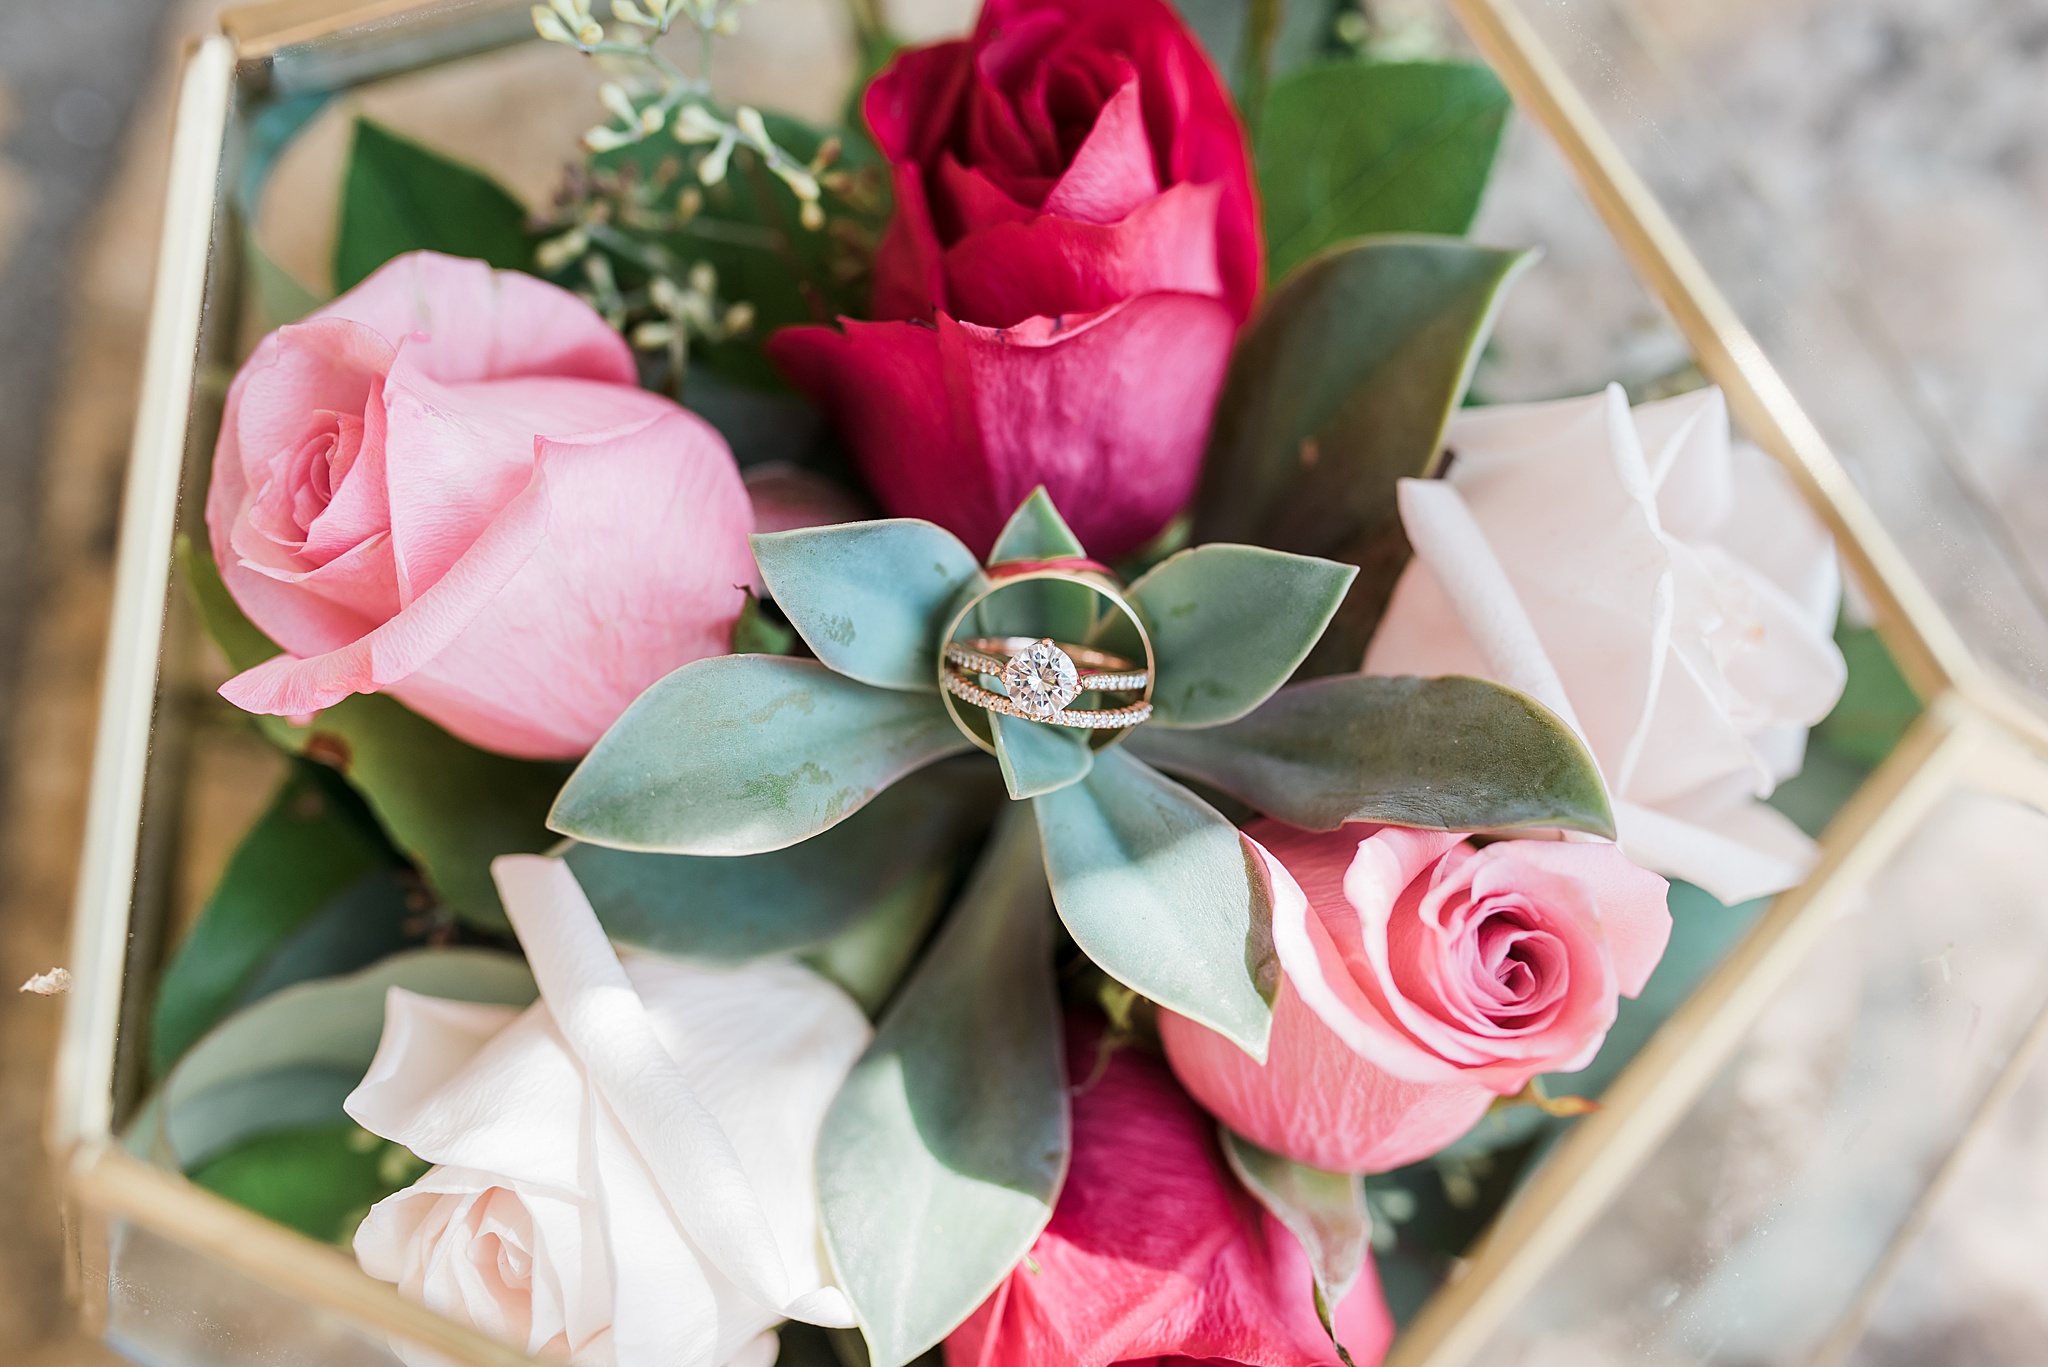 Engagement Ring in flowers at an Orange County Proposal Locations